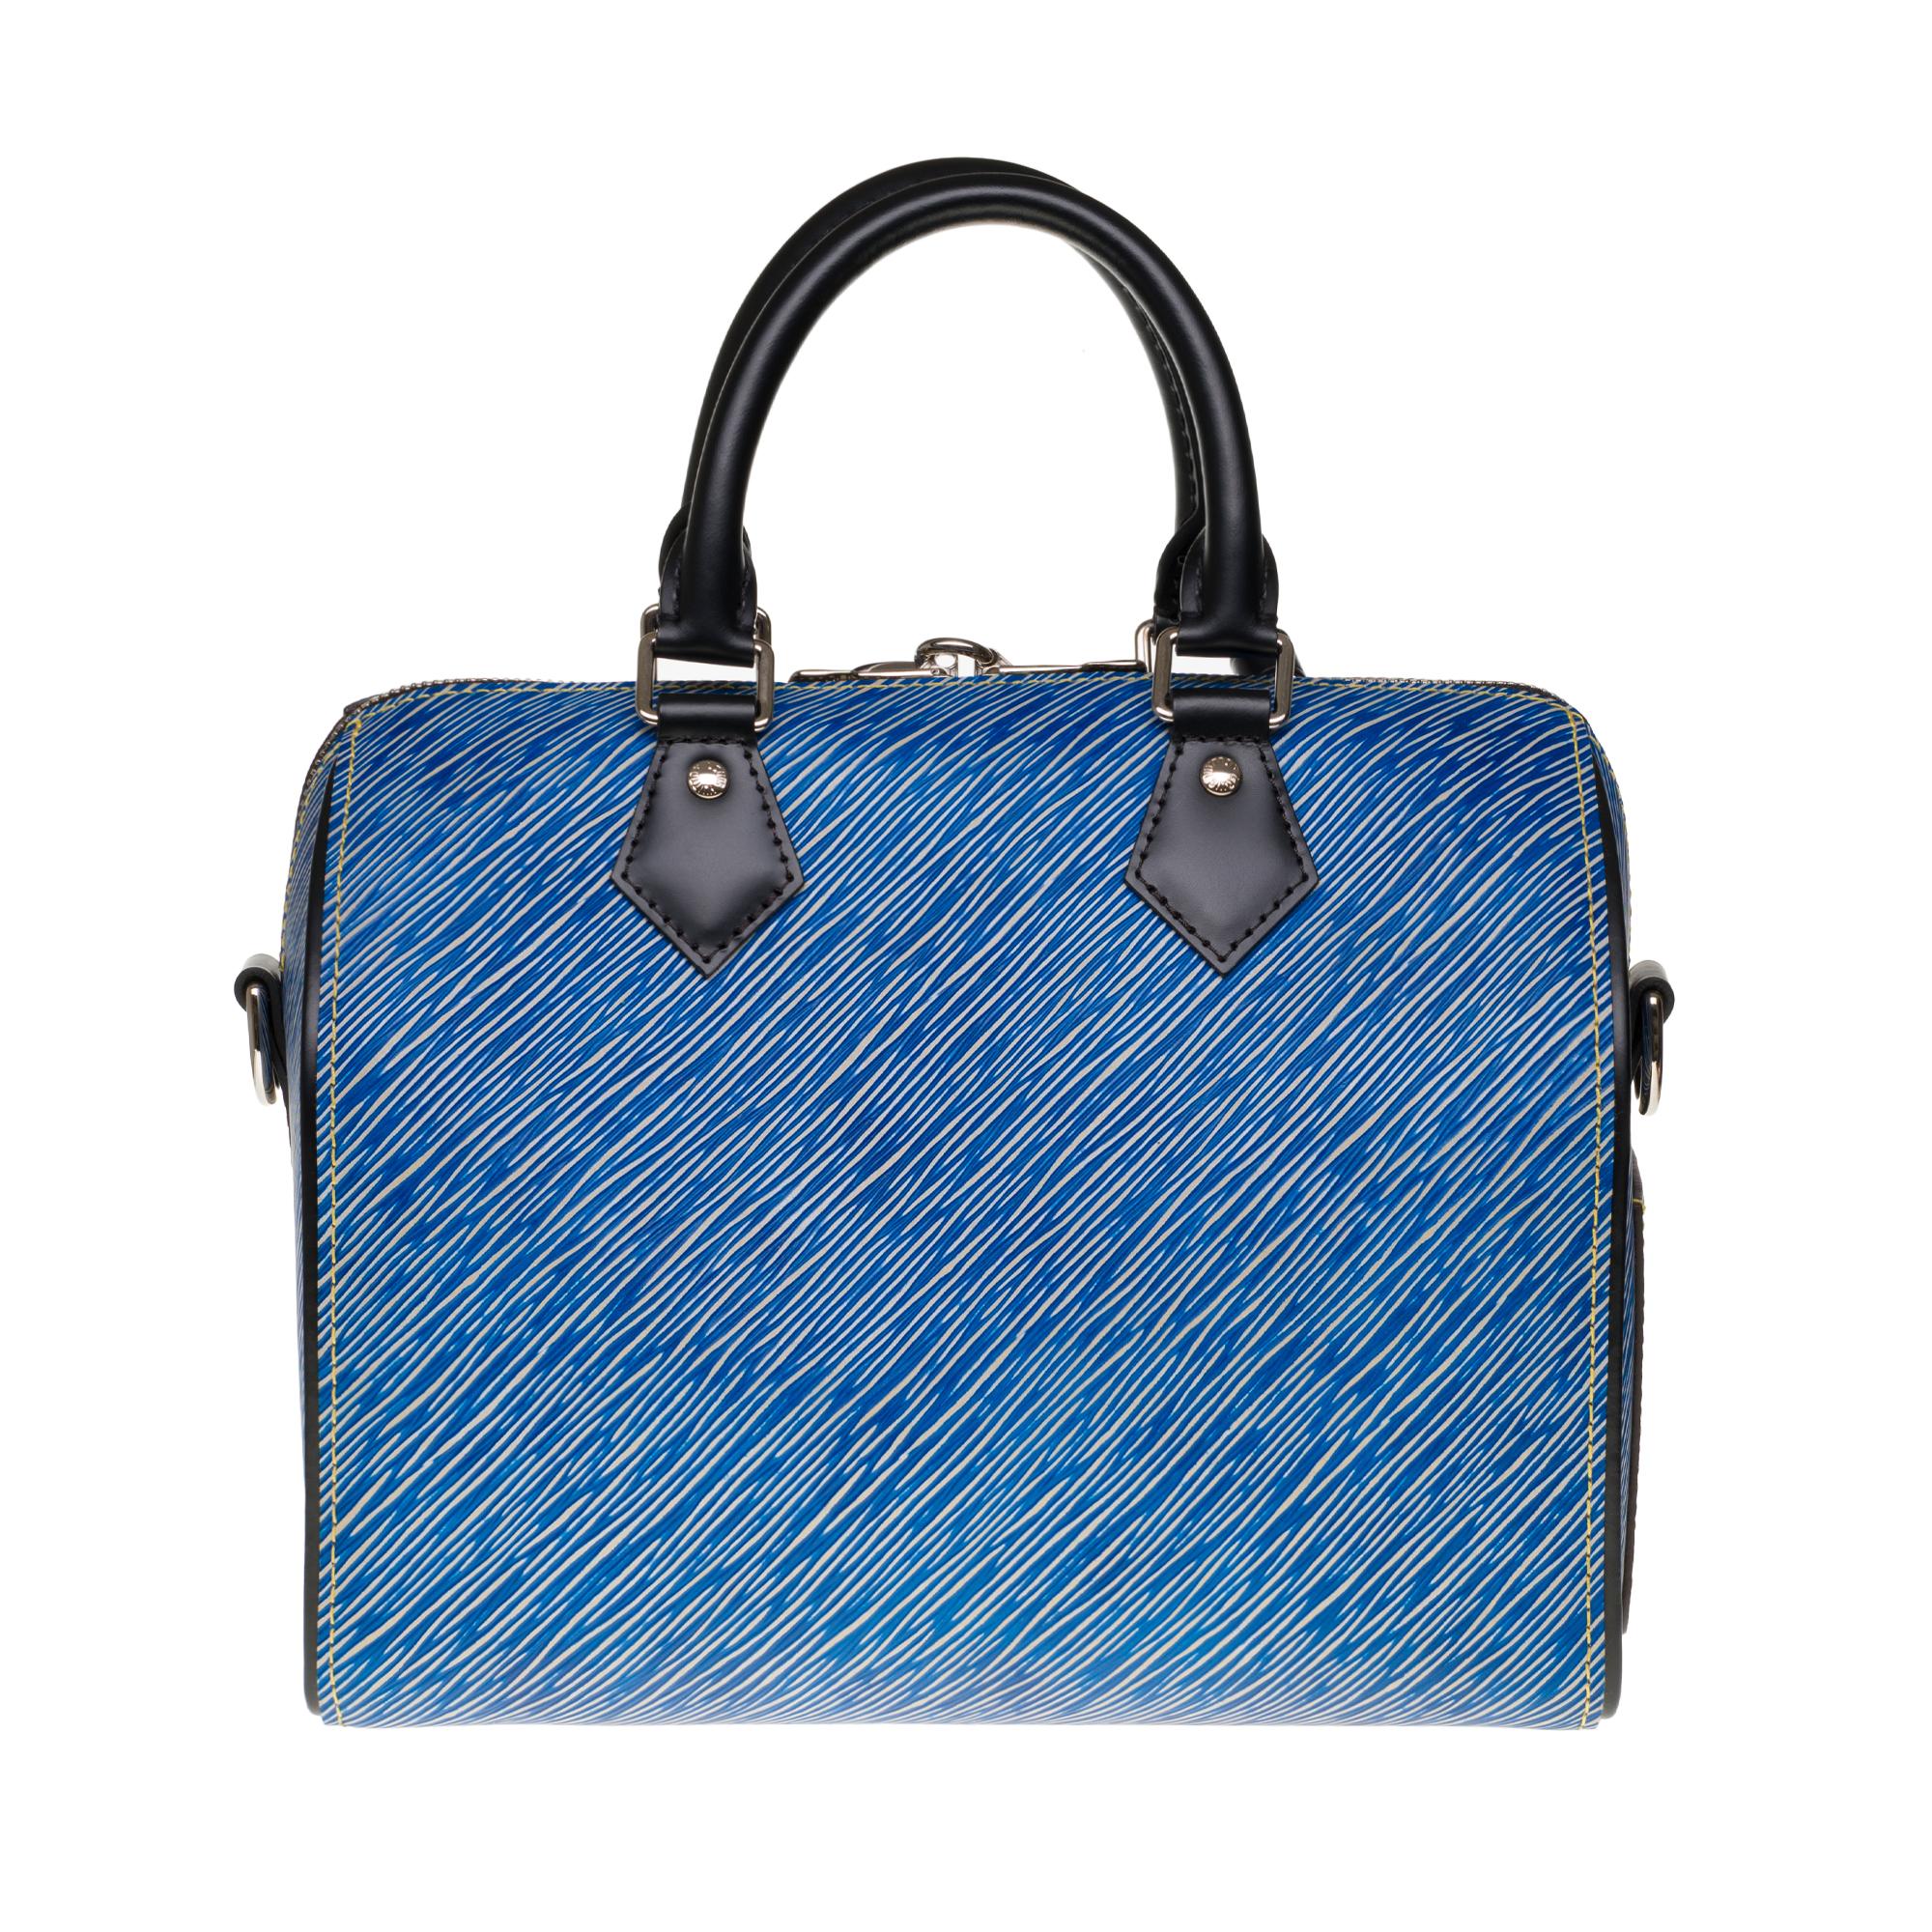 Speedy Bandouliere 25 Denim Light tote is finely crafted of Louis Vuitton signature textured epi leather in blue and white. The shoulder bag features black rolled leather top handles and an optional, adjustable shoulder strap with polished silver